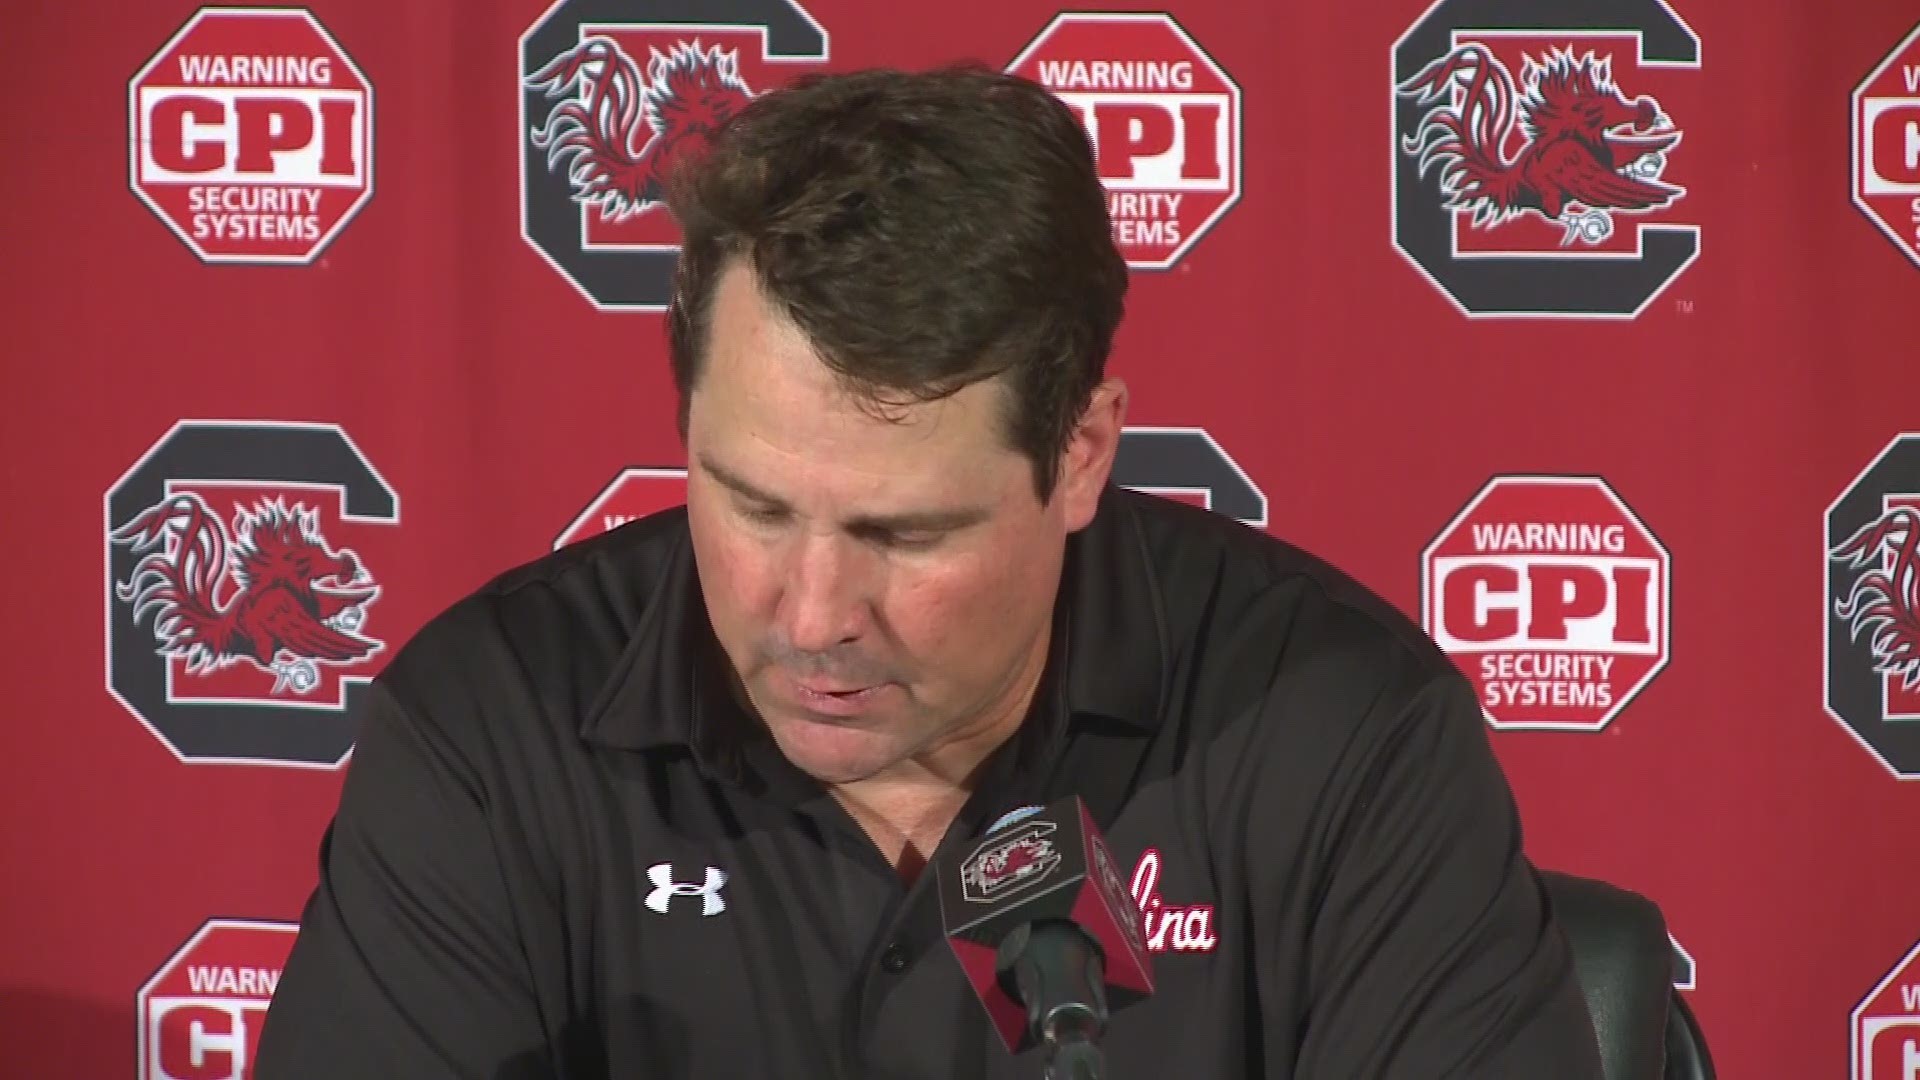 USC head football coach Will Muschamp answers questions after his team's 26-23 loss to #22 Texas A&M.